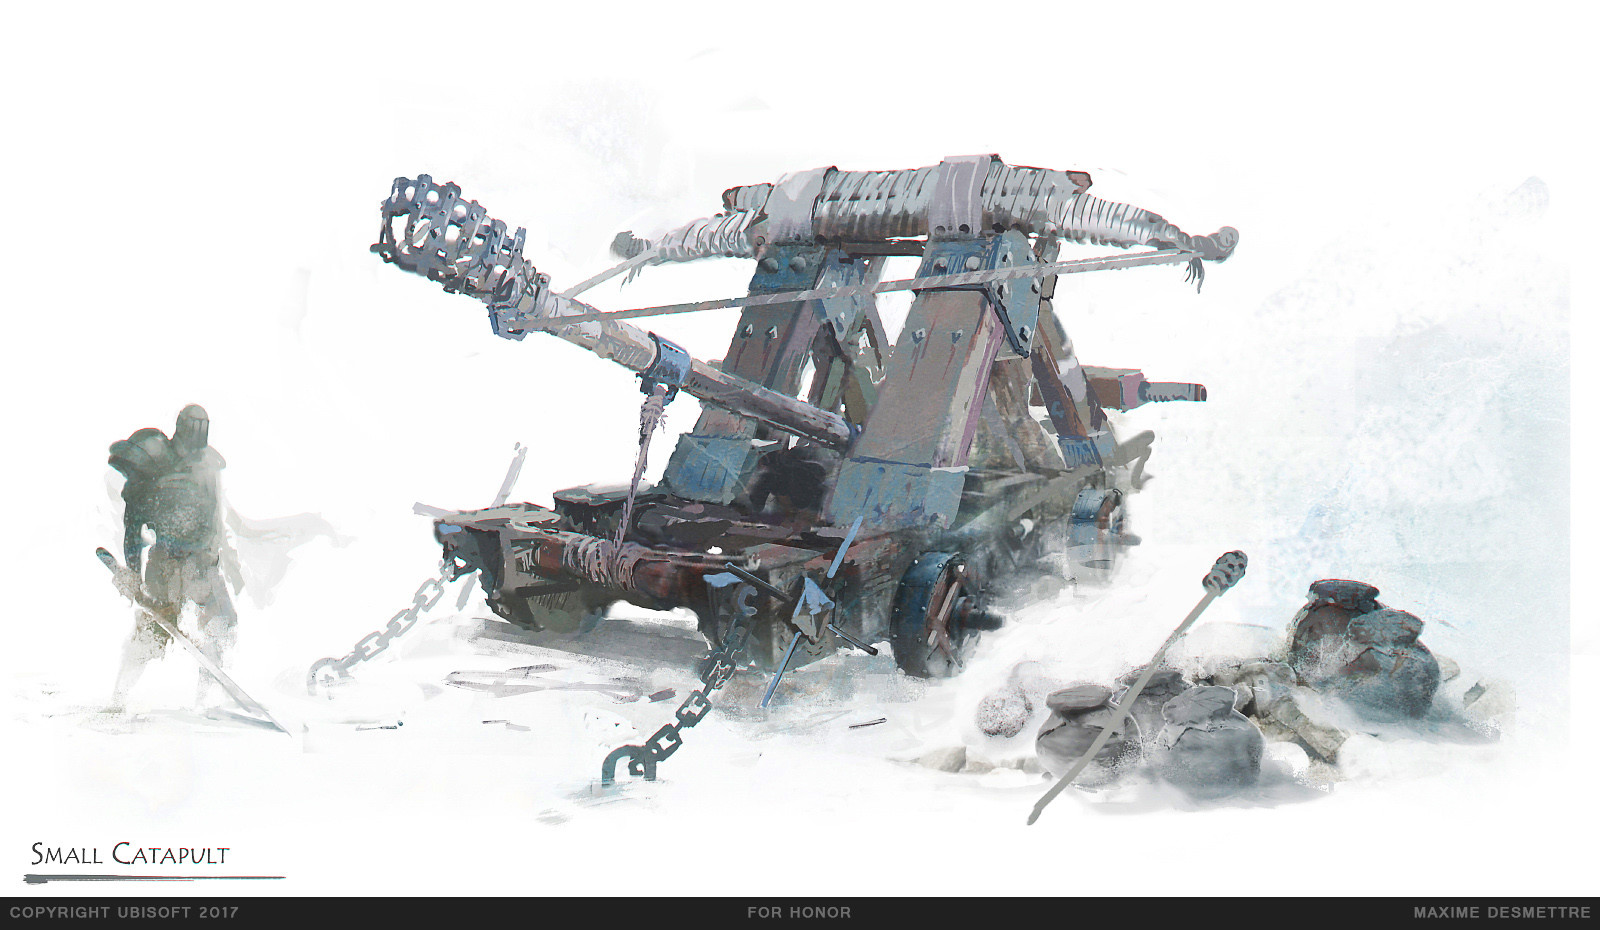 Small Catapult 
An early War Machine design for For Honor (2014)